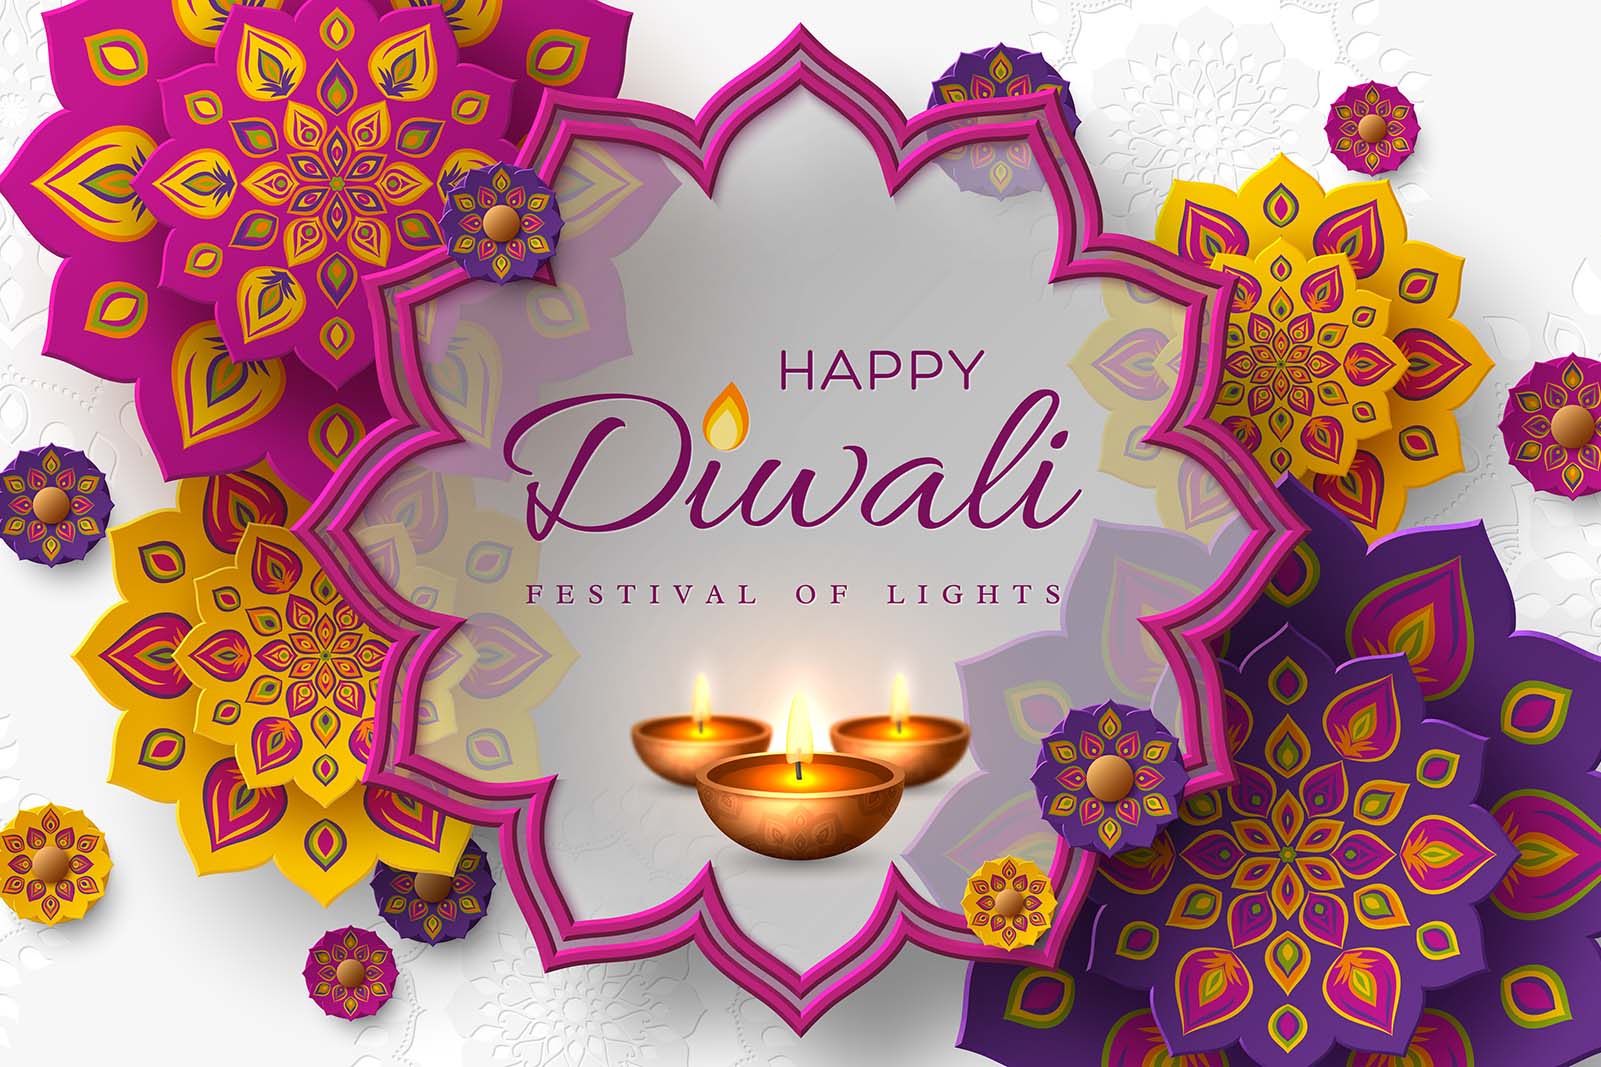 Happy Diwali from The Container Store! | Container Stories